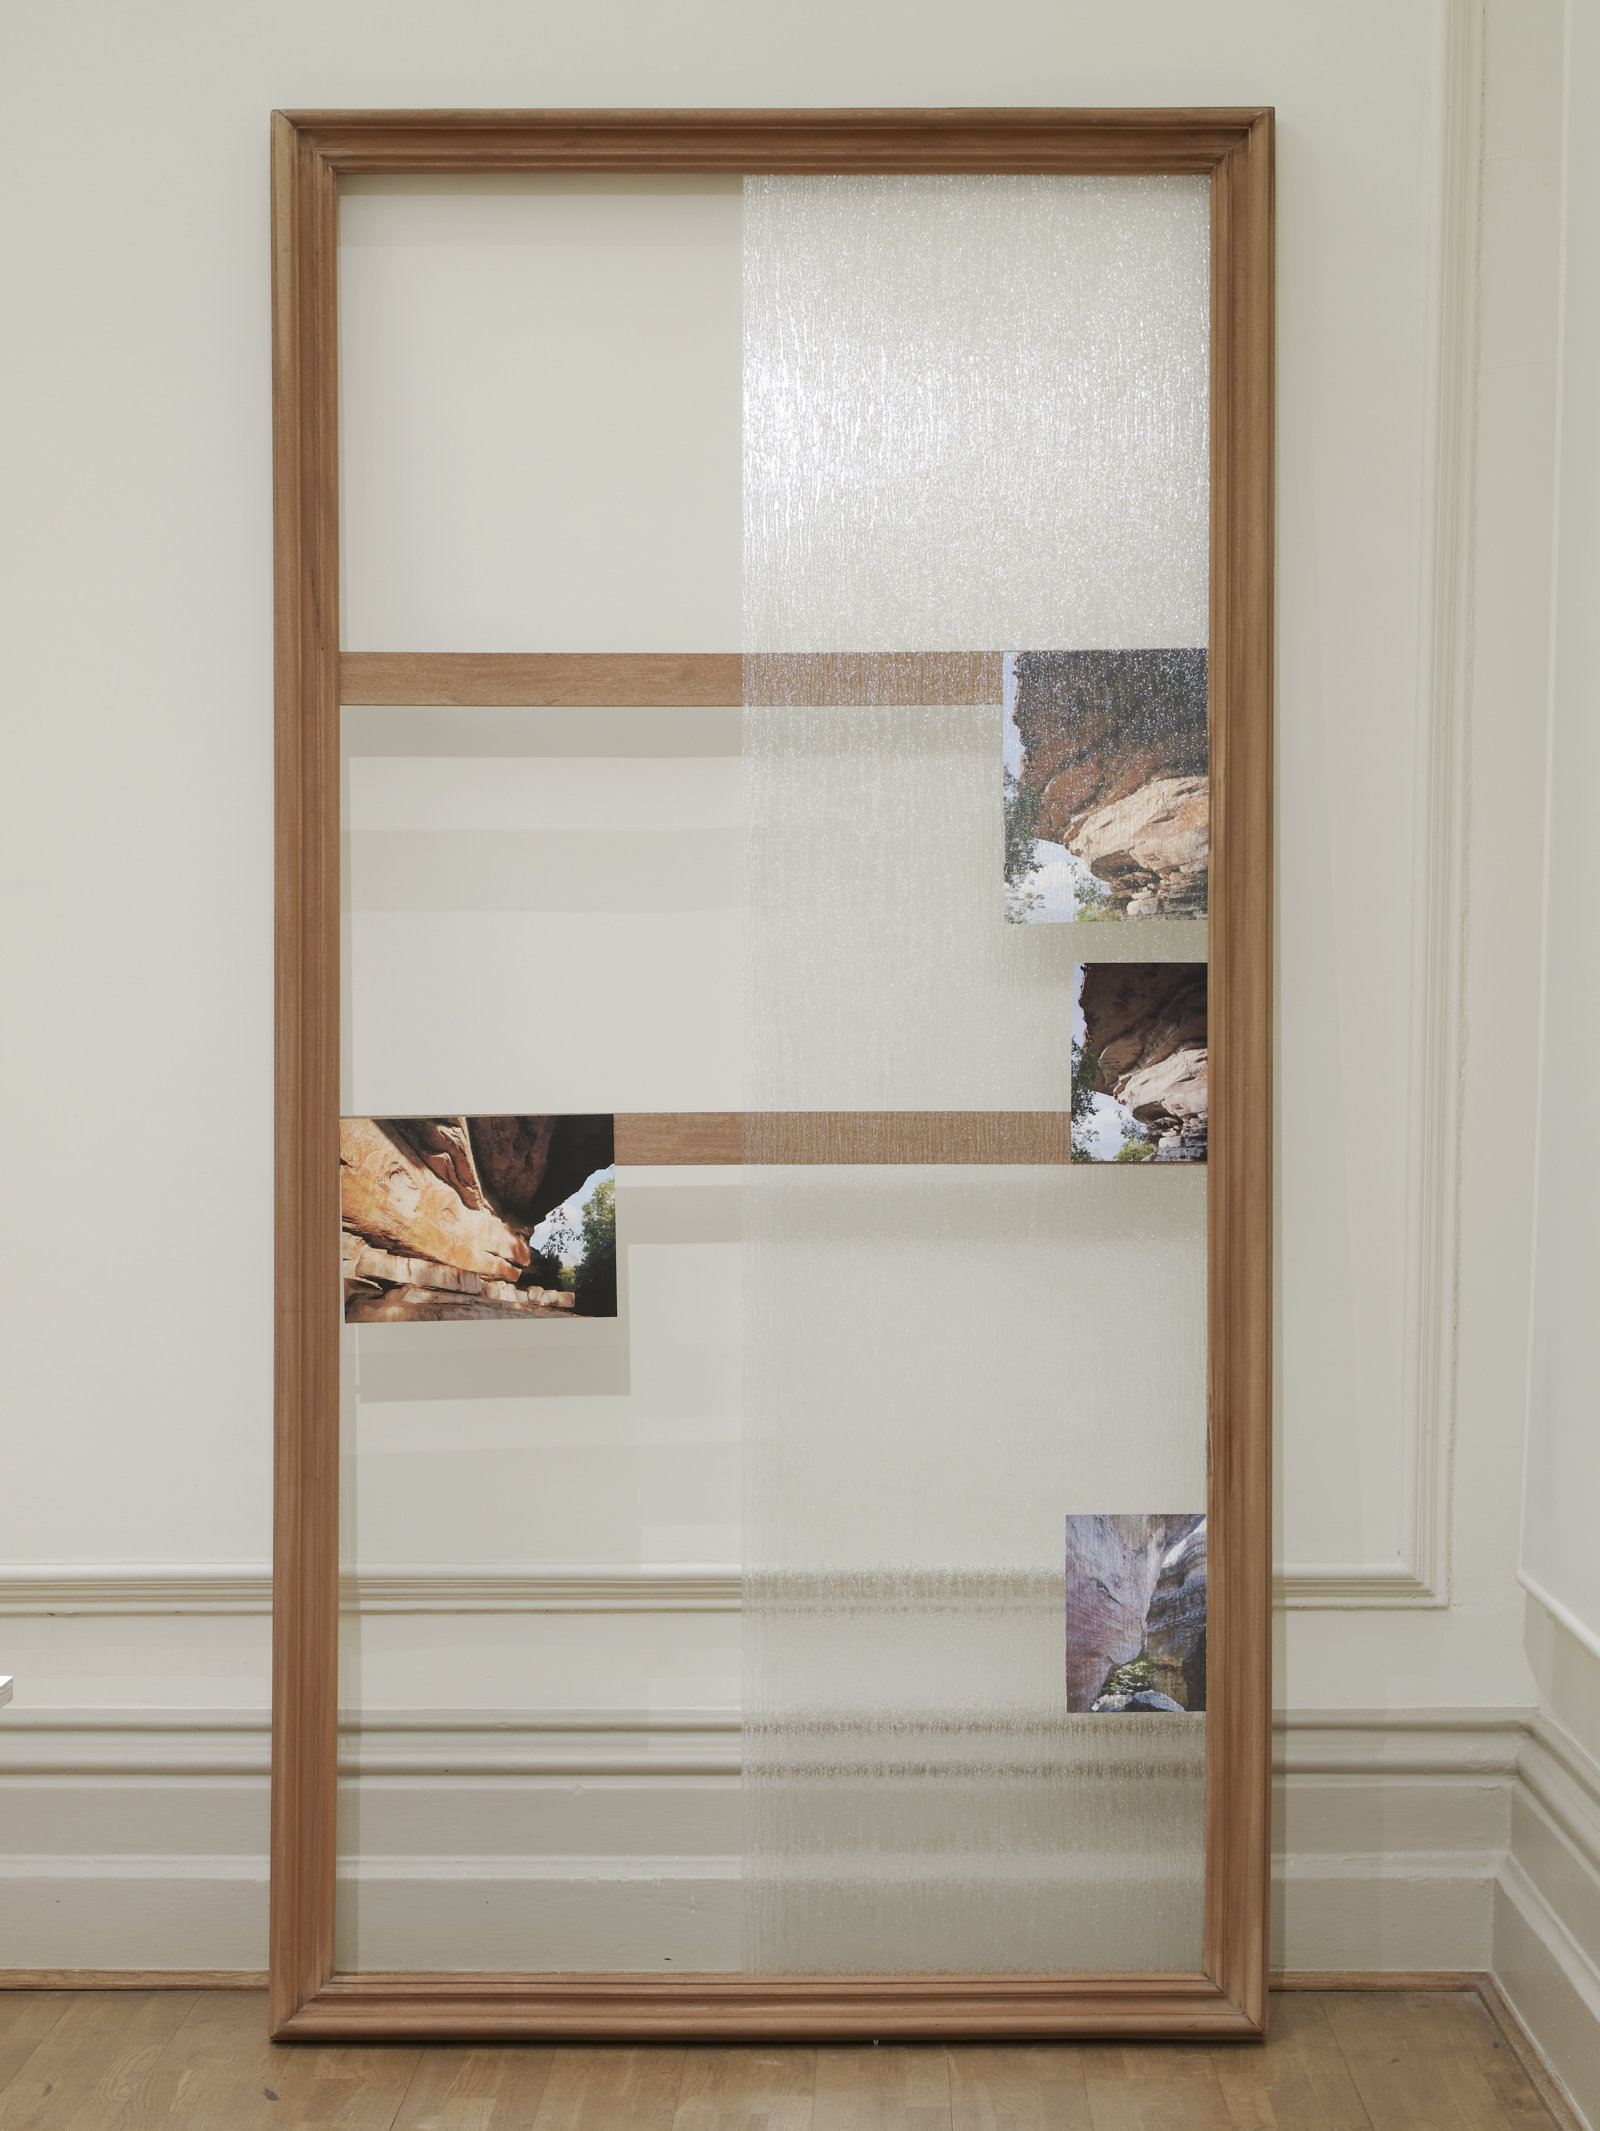 Christina Mackie, The Judges III (detail), 2013, mixed media, dimensions variable. Installation view, Nottingham Castle Museum, 2013